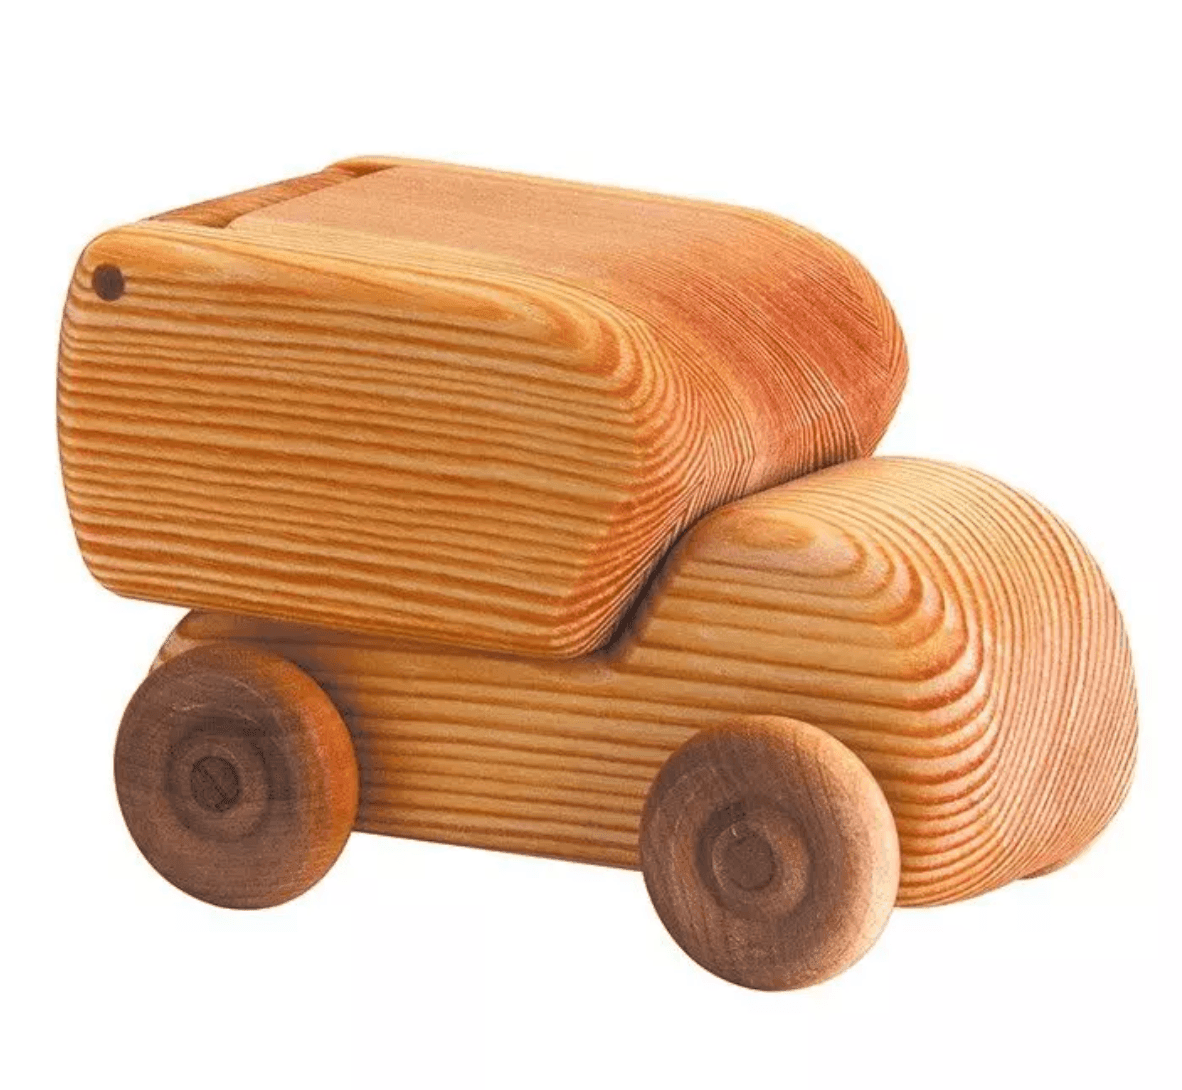 Debresk - Wooden Toy Delivery Van Small - Why and Whale